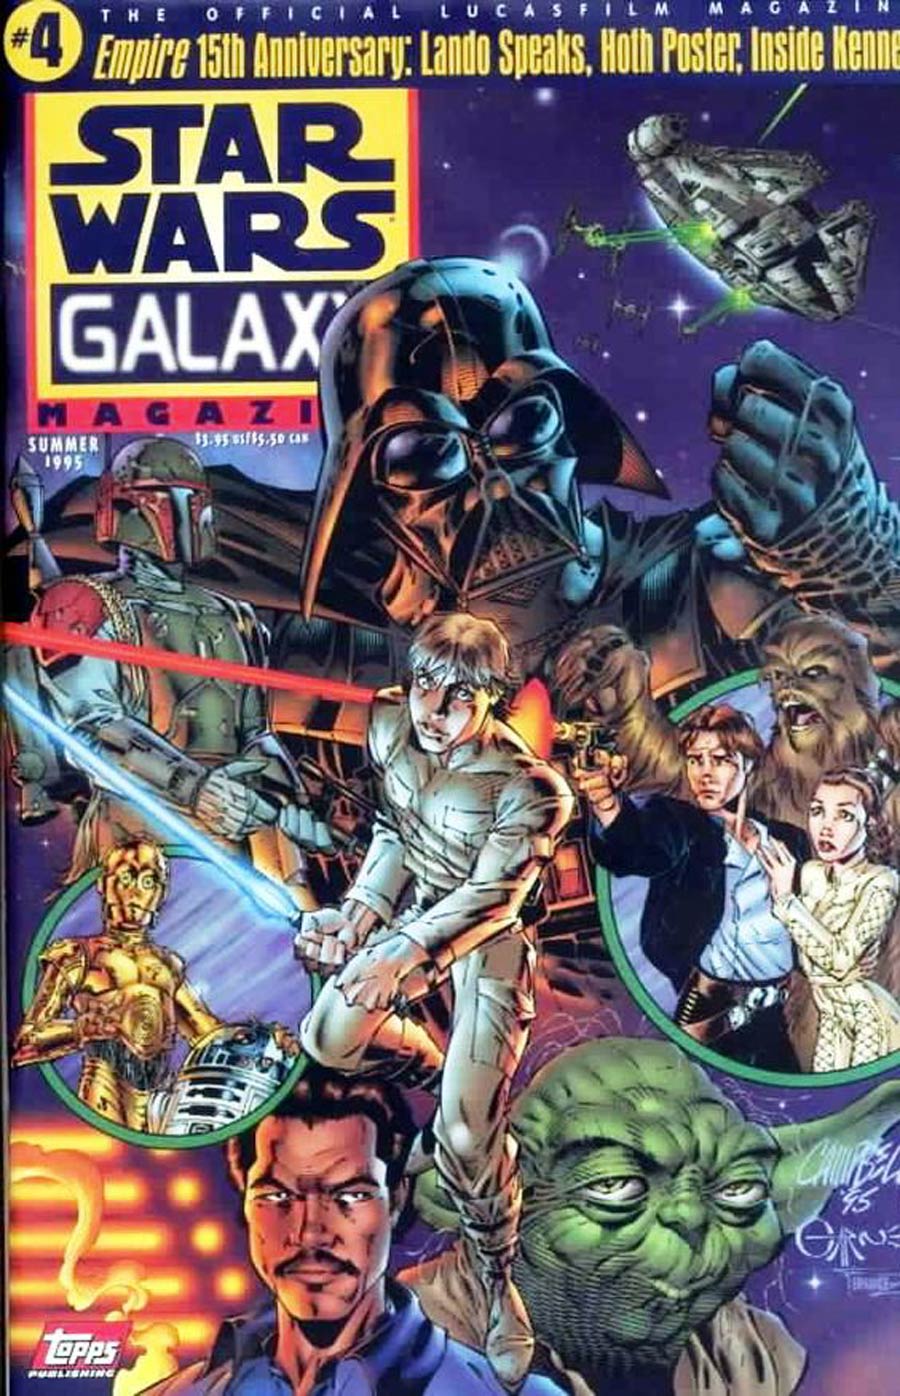 Star Wars Galaxy Magazine #4 Cover A Polybagged